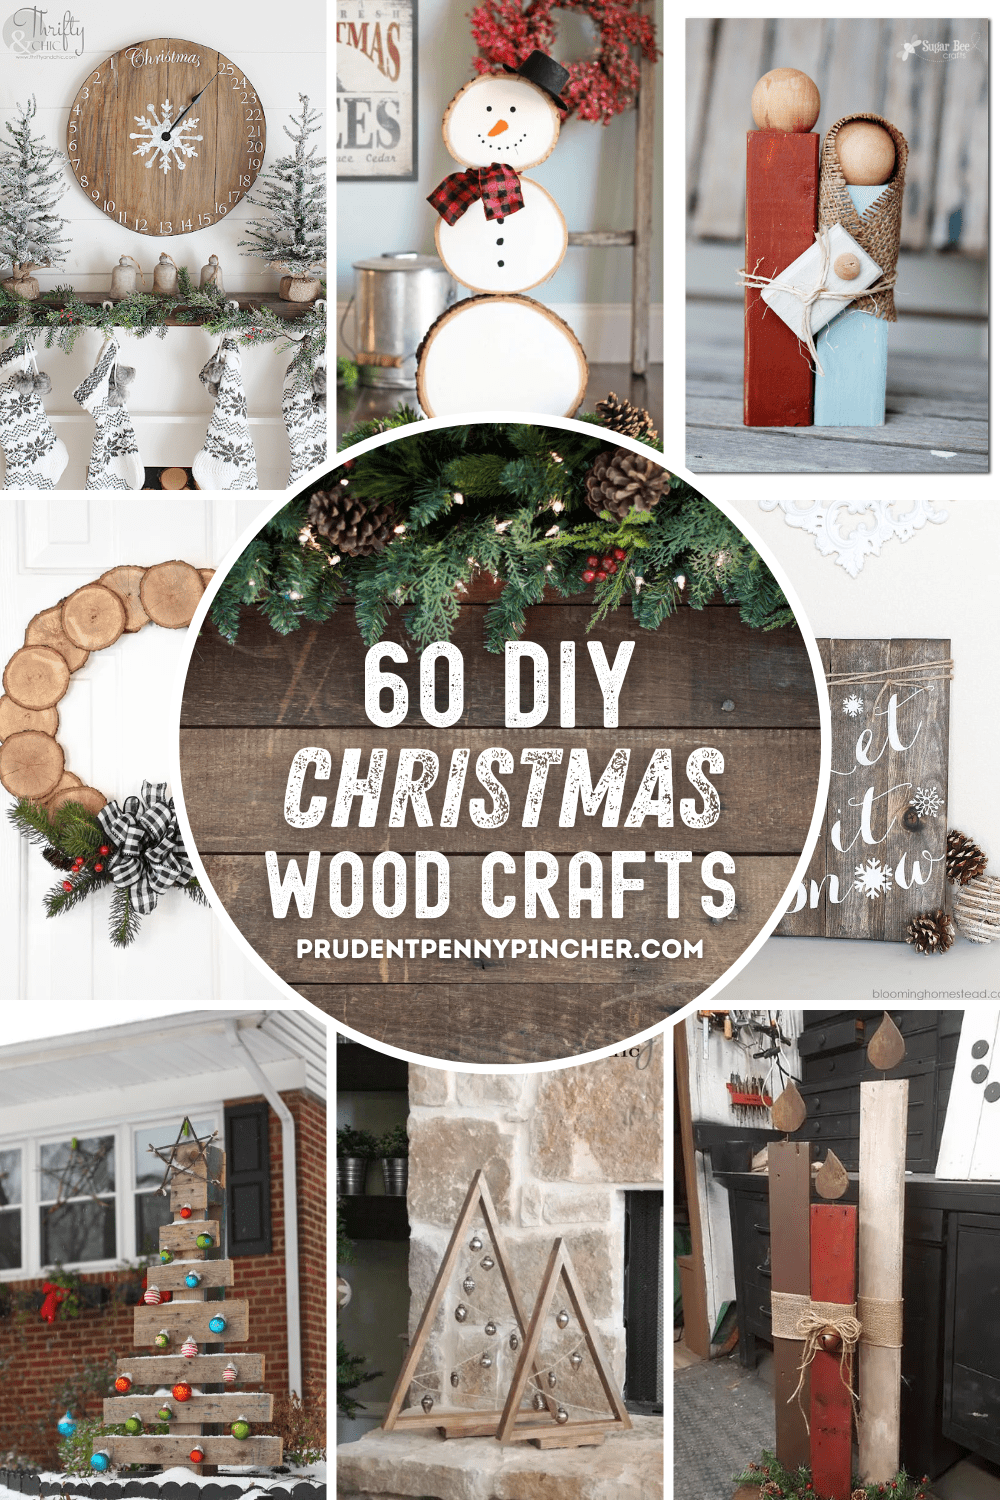 60 DIY Christmas Wood Crafts - Prudent Penny Pincher